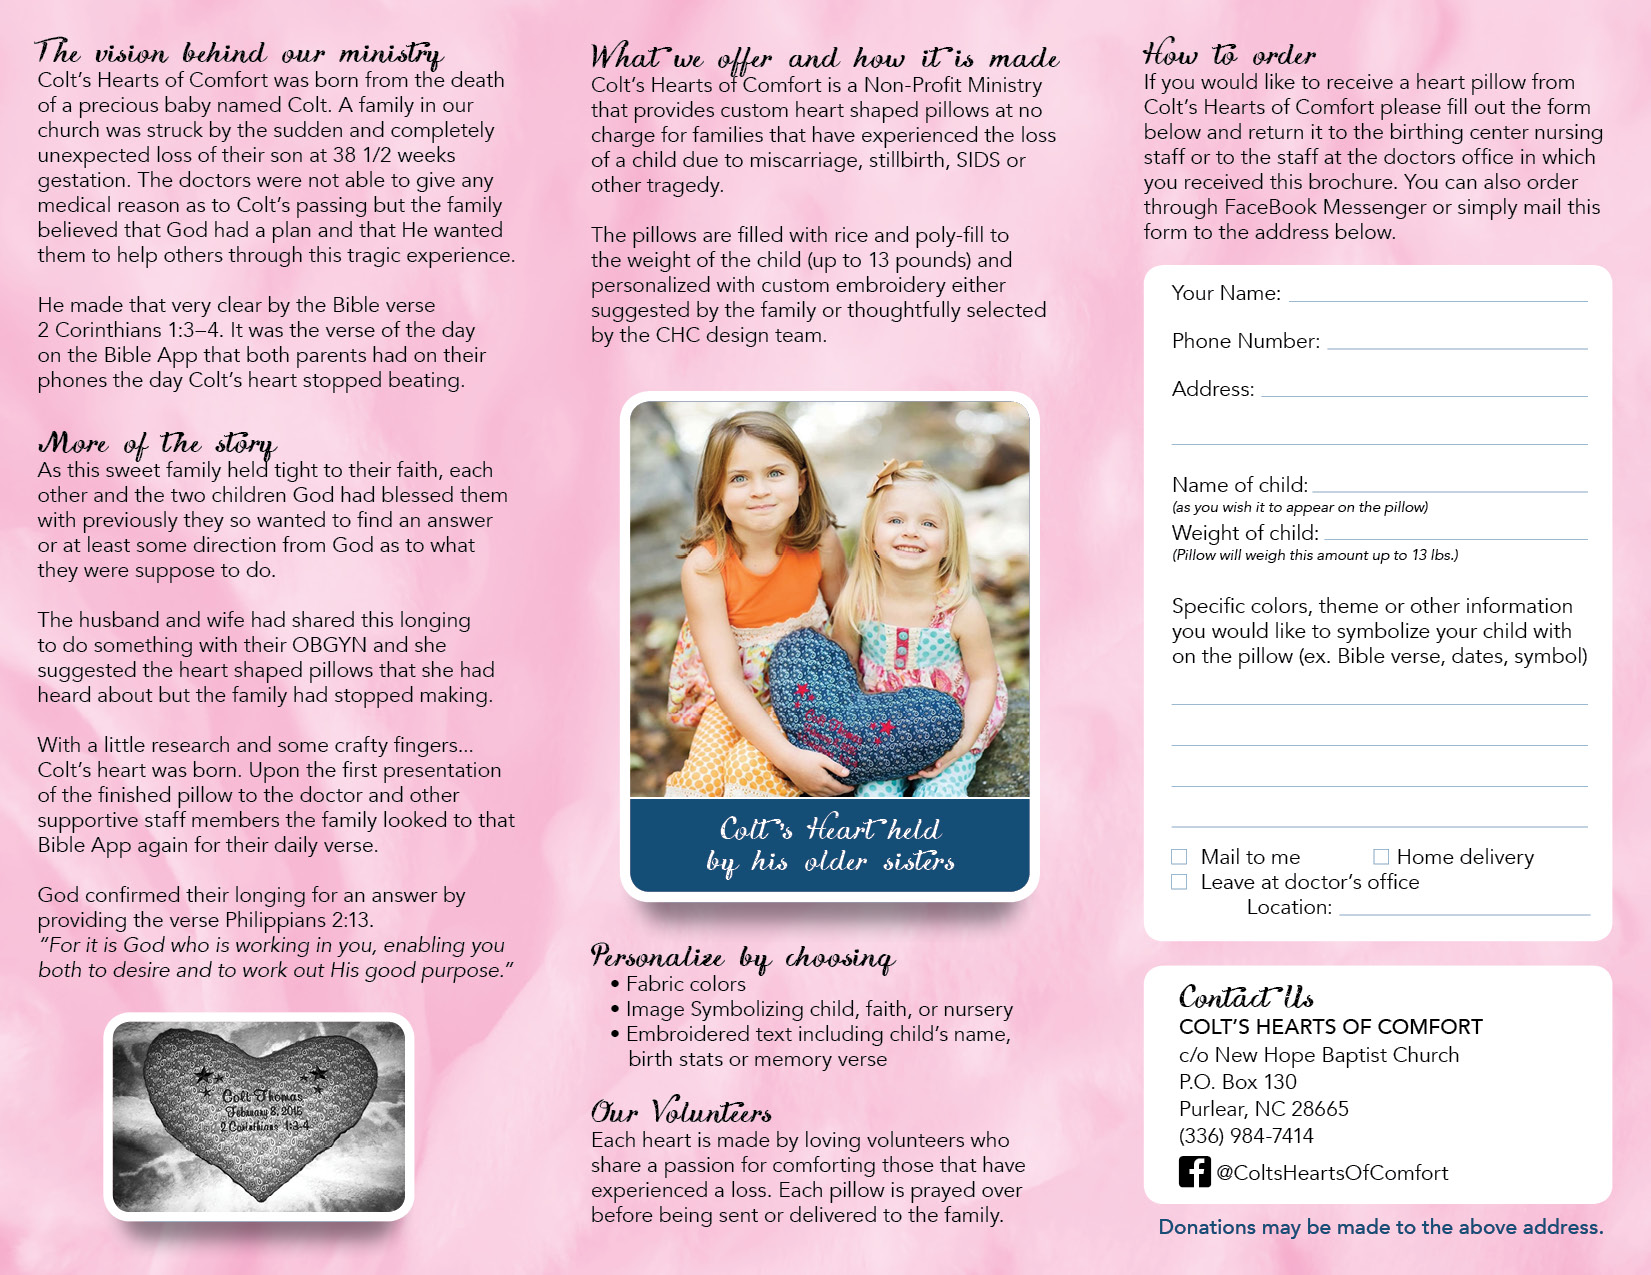 colts heart tri-fold brochure design by graphic artists pixels on paper